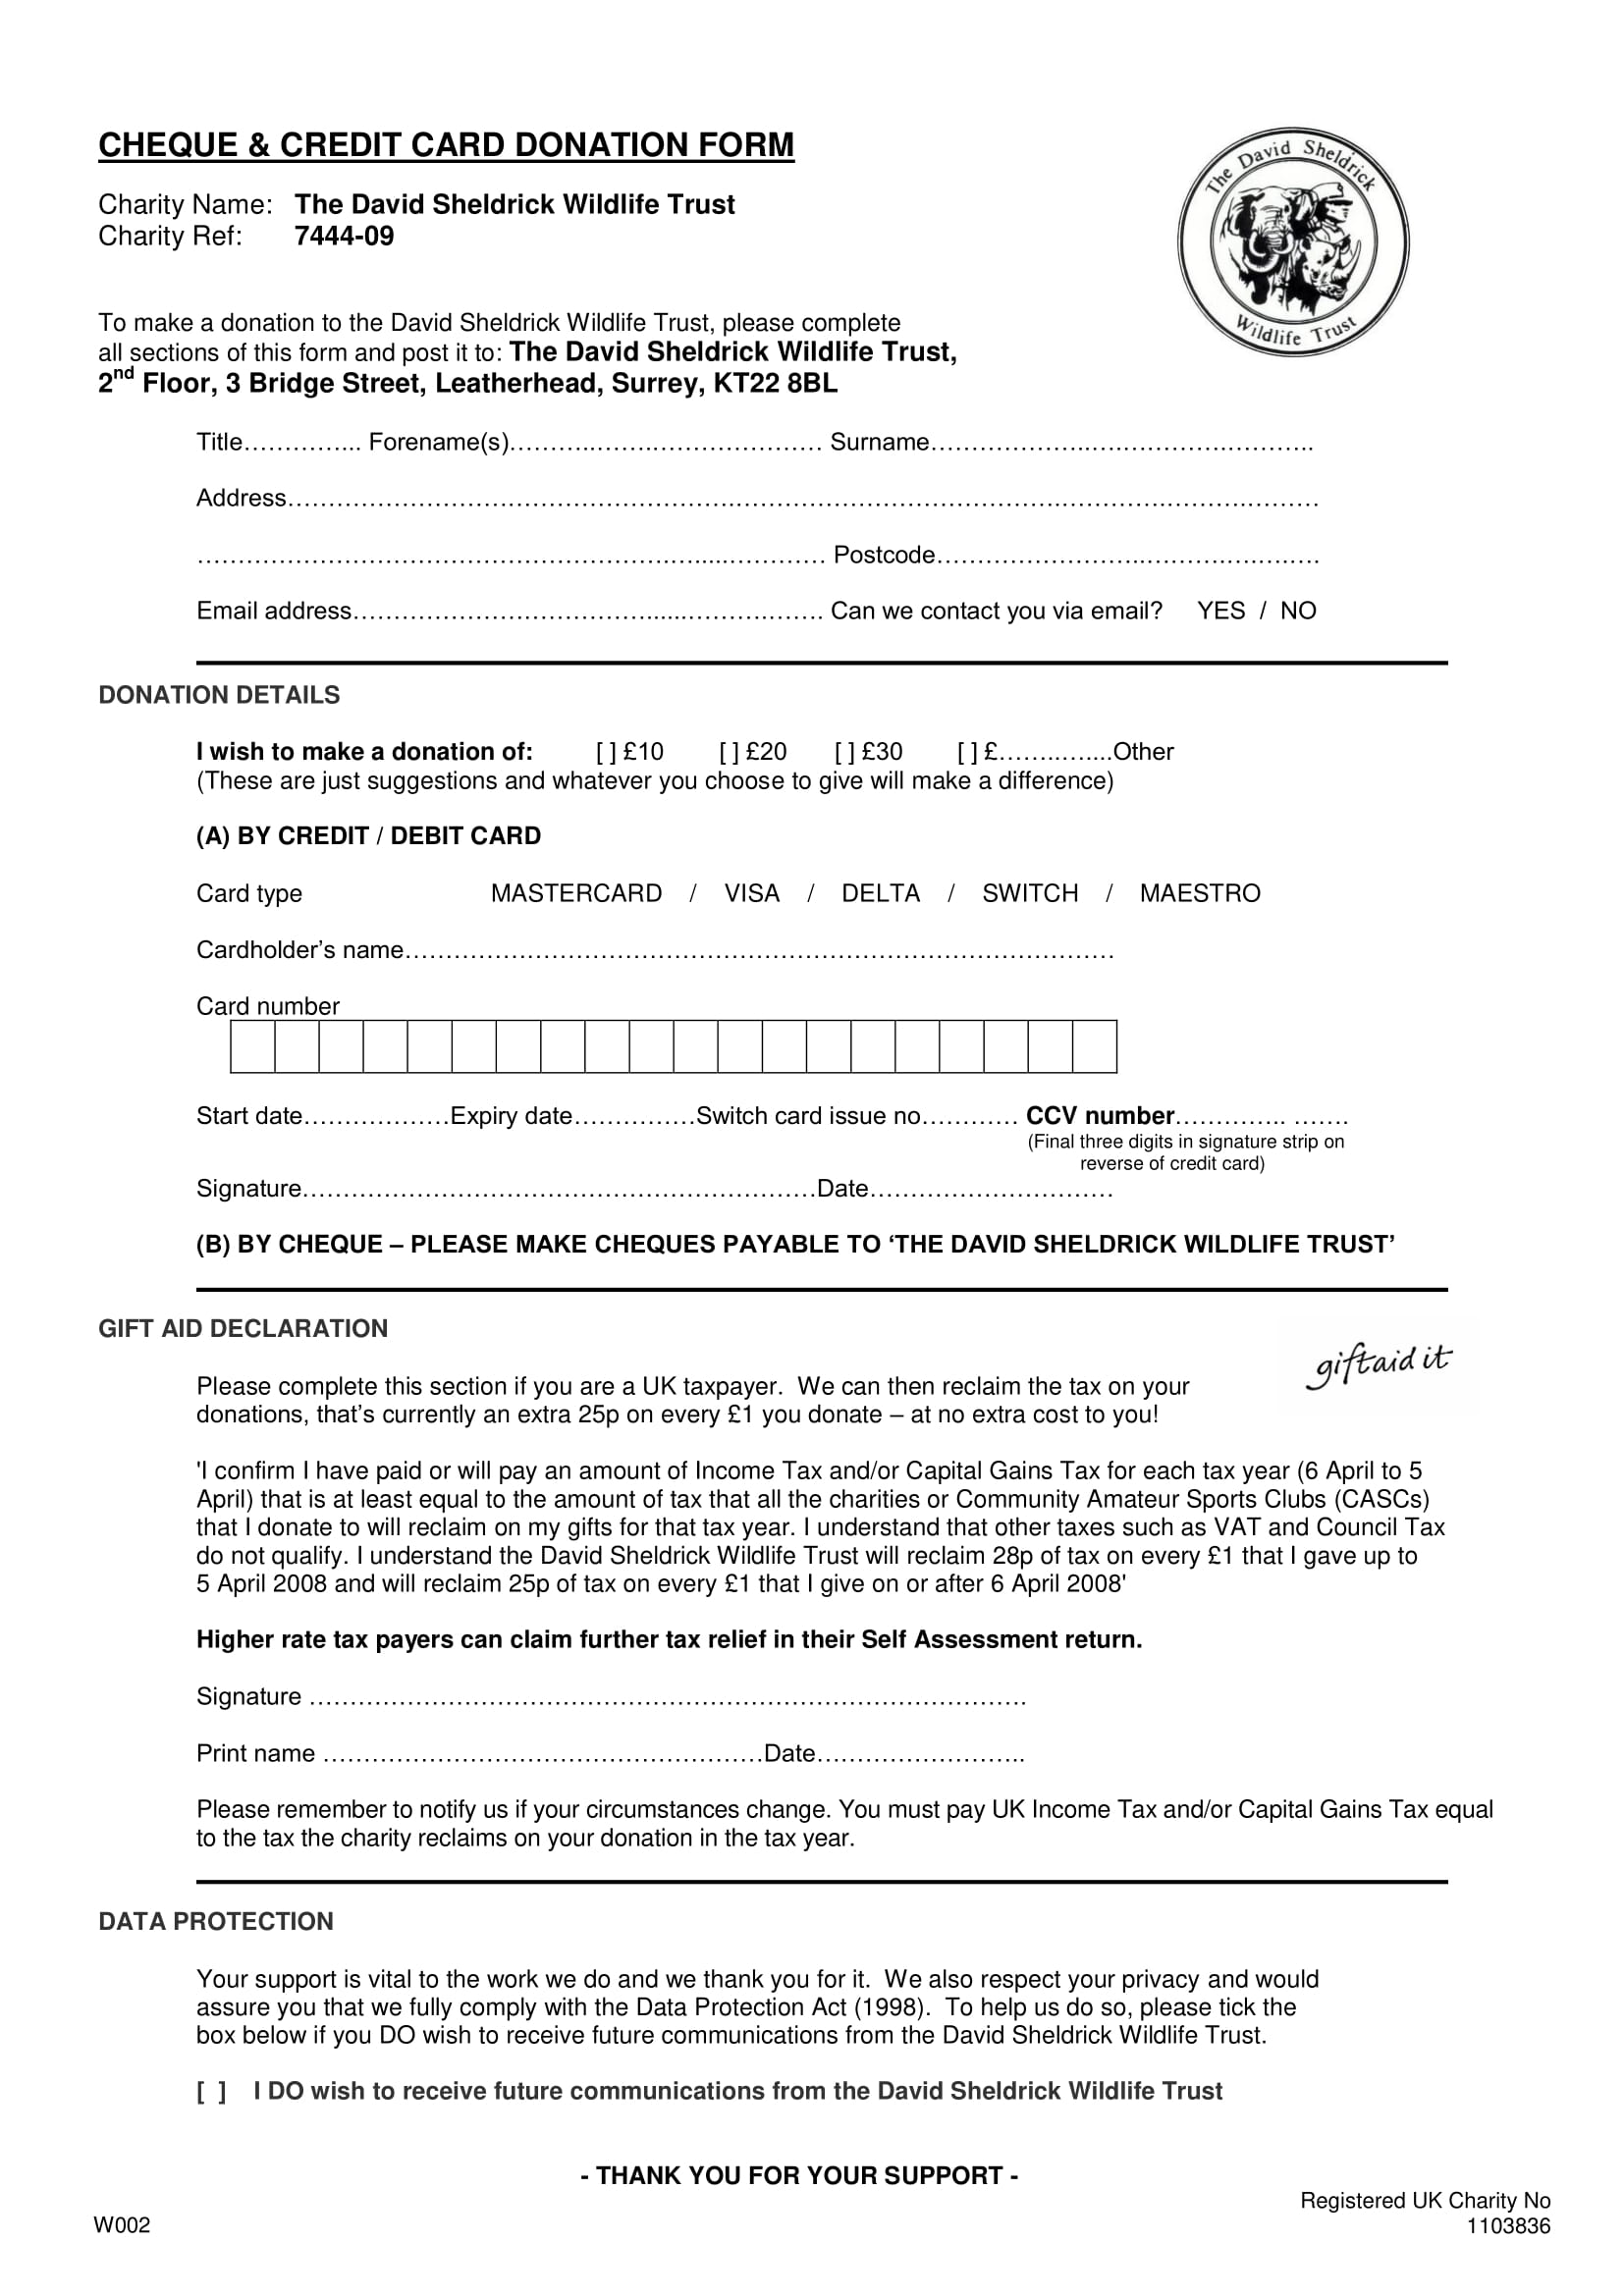 cheque and credit card donation form 1